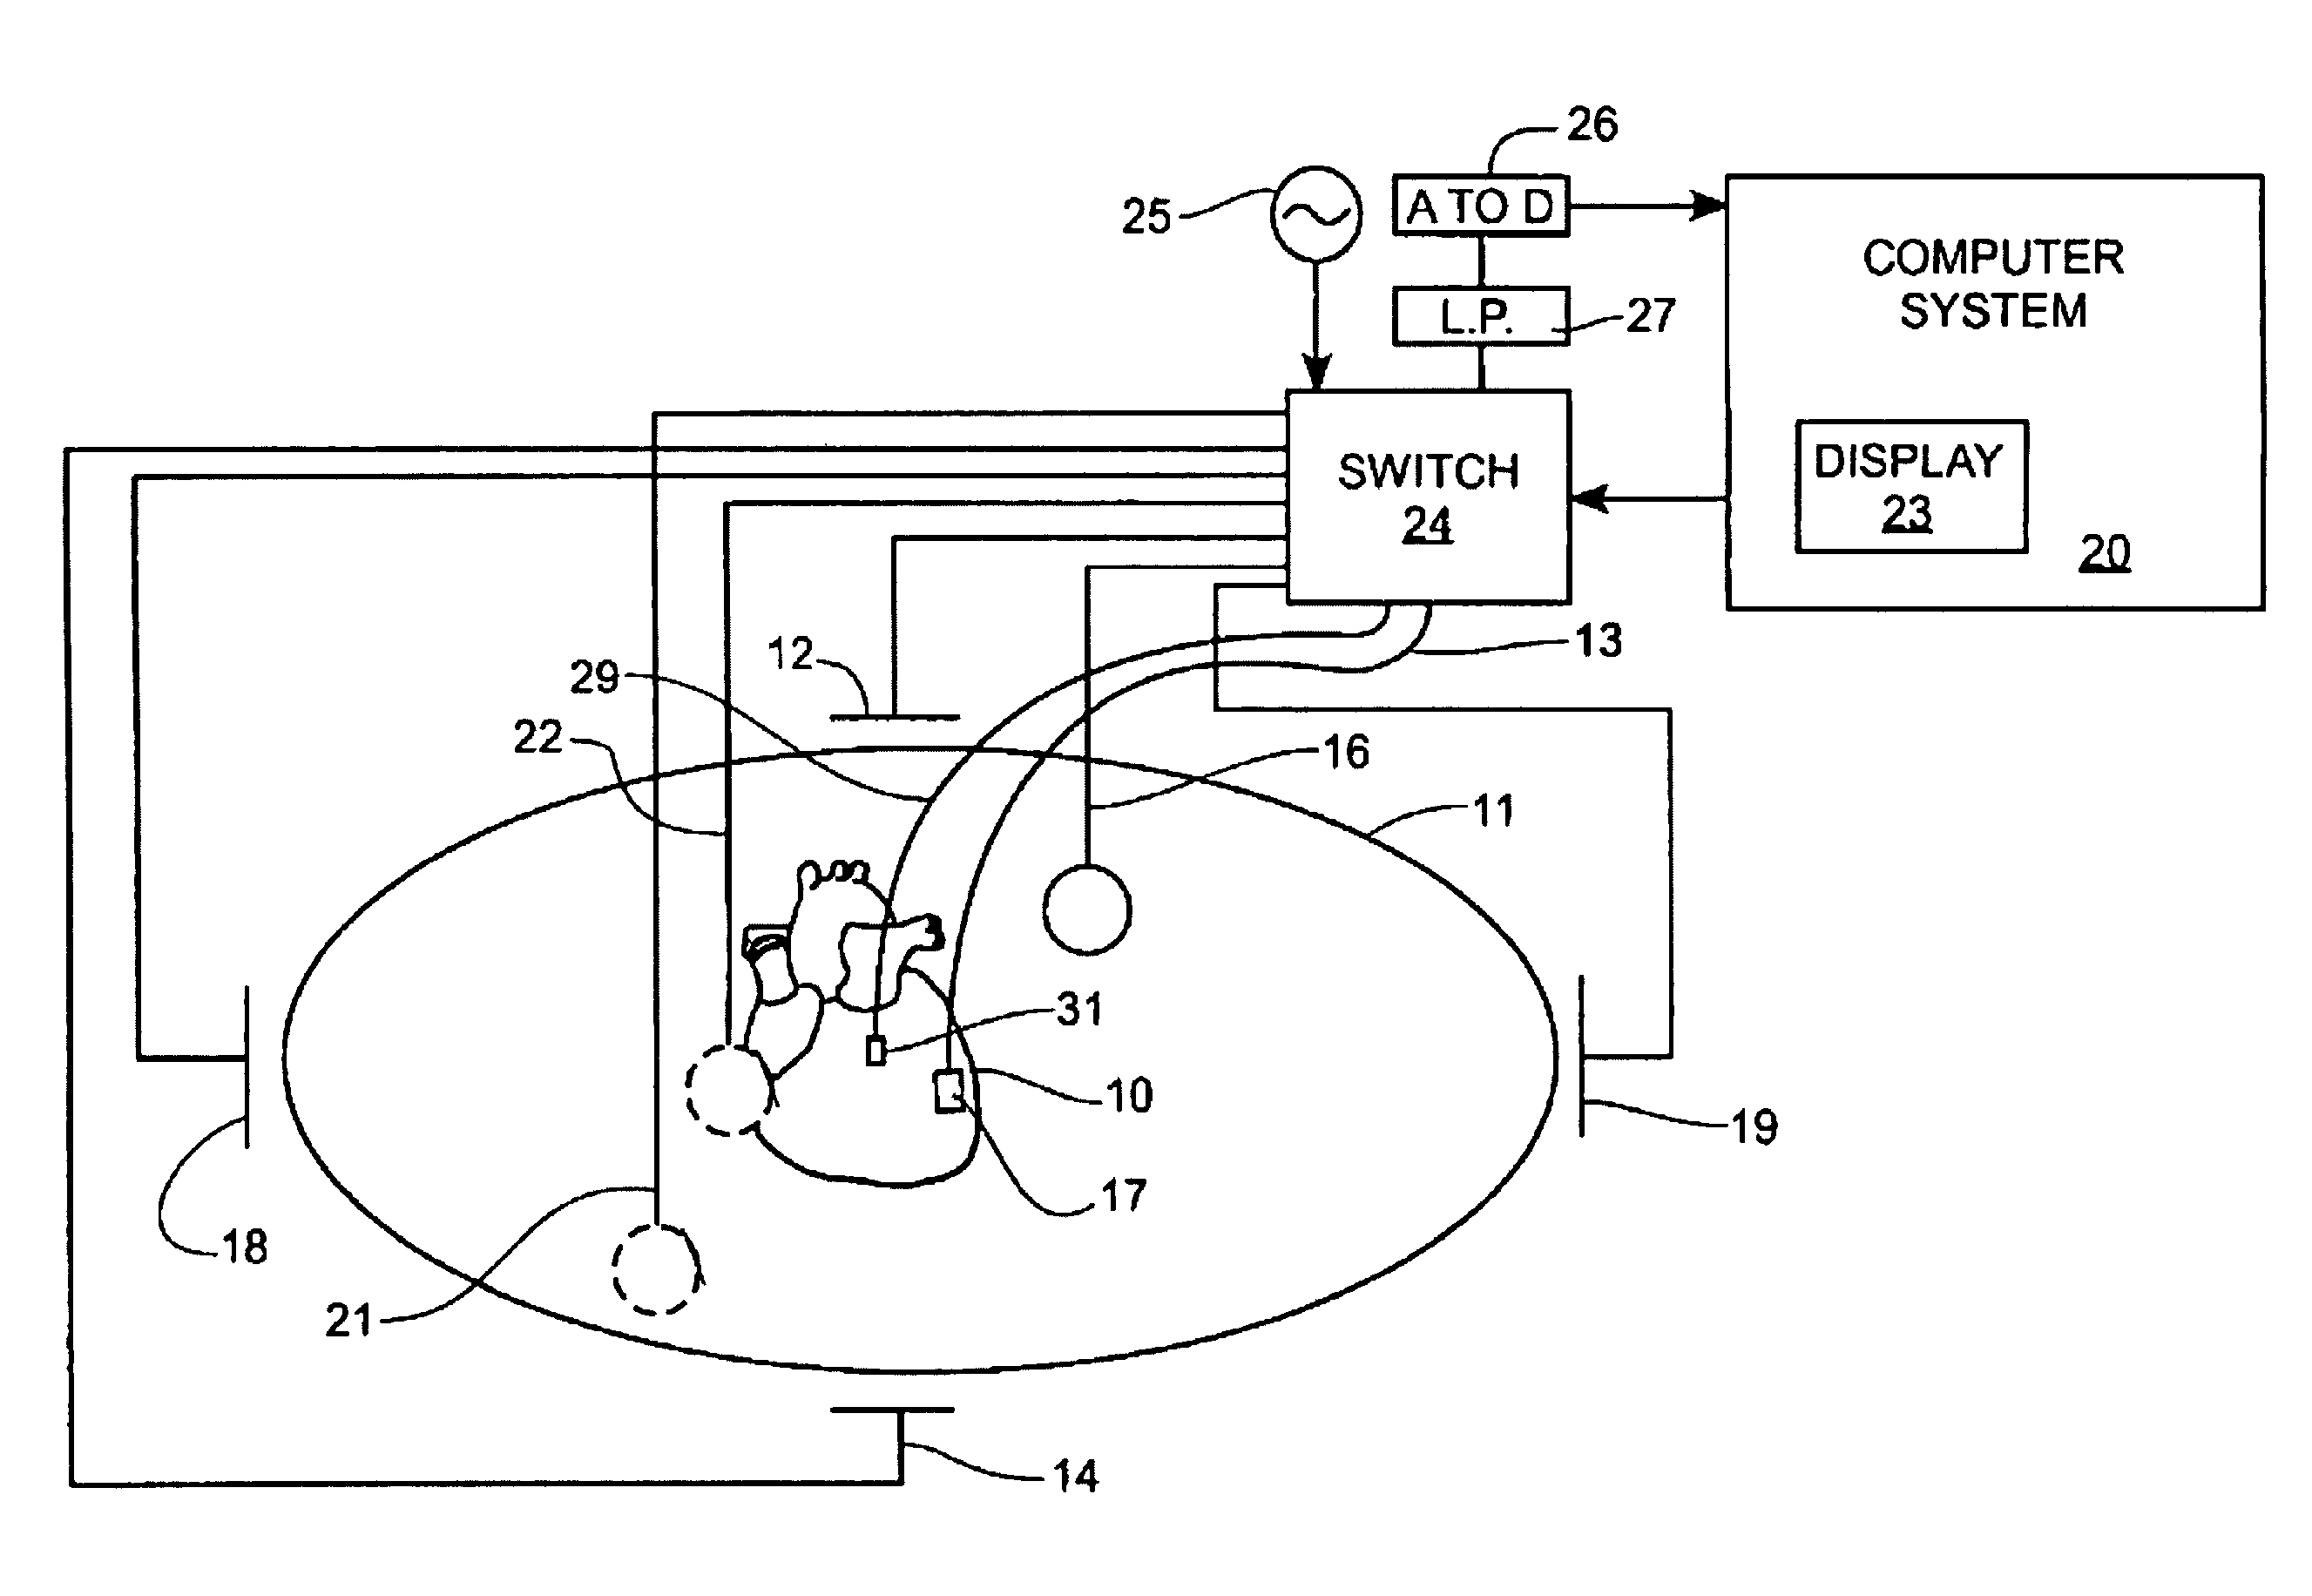 Method of scaling navigation signals to account for impedance drift in tissue